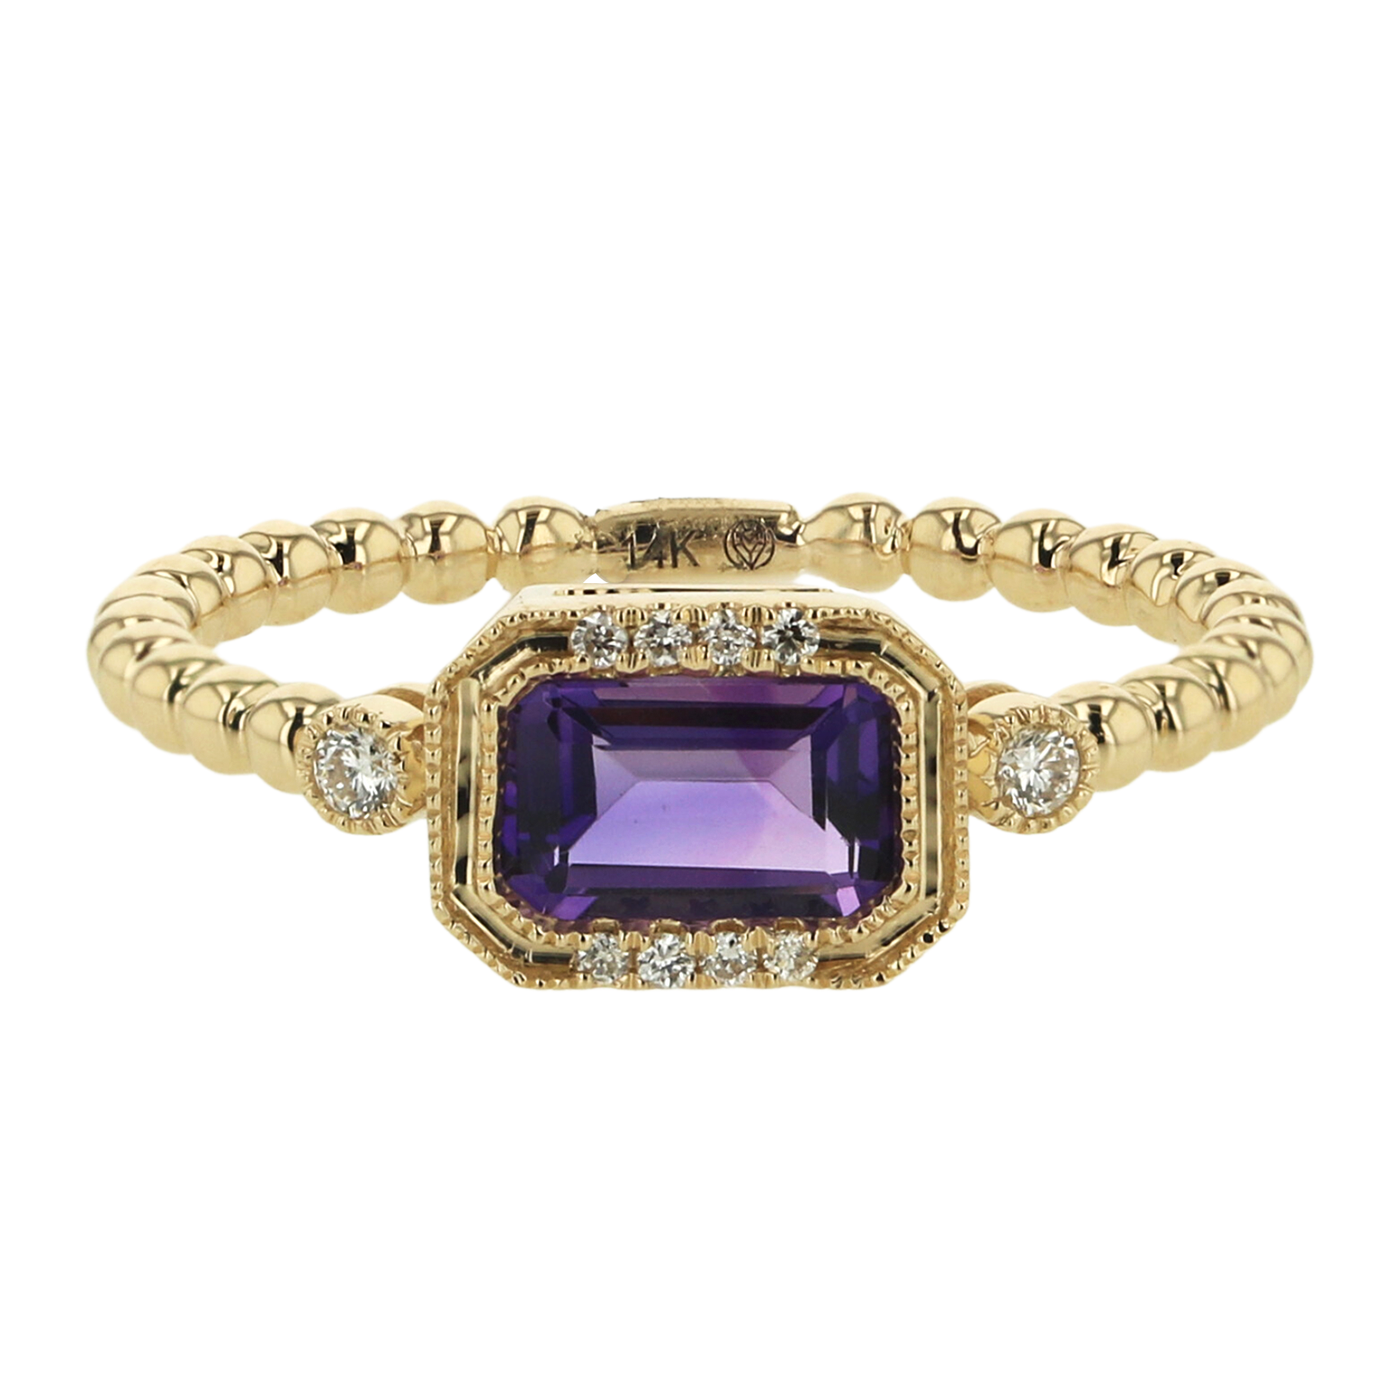 "Lilac Gleam" 0.51 CTW Amethyst and 0.05 CTTW Diamond Ring